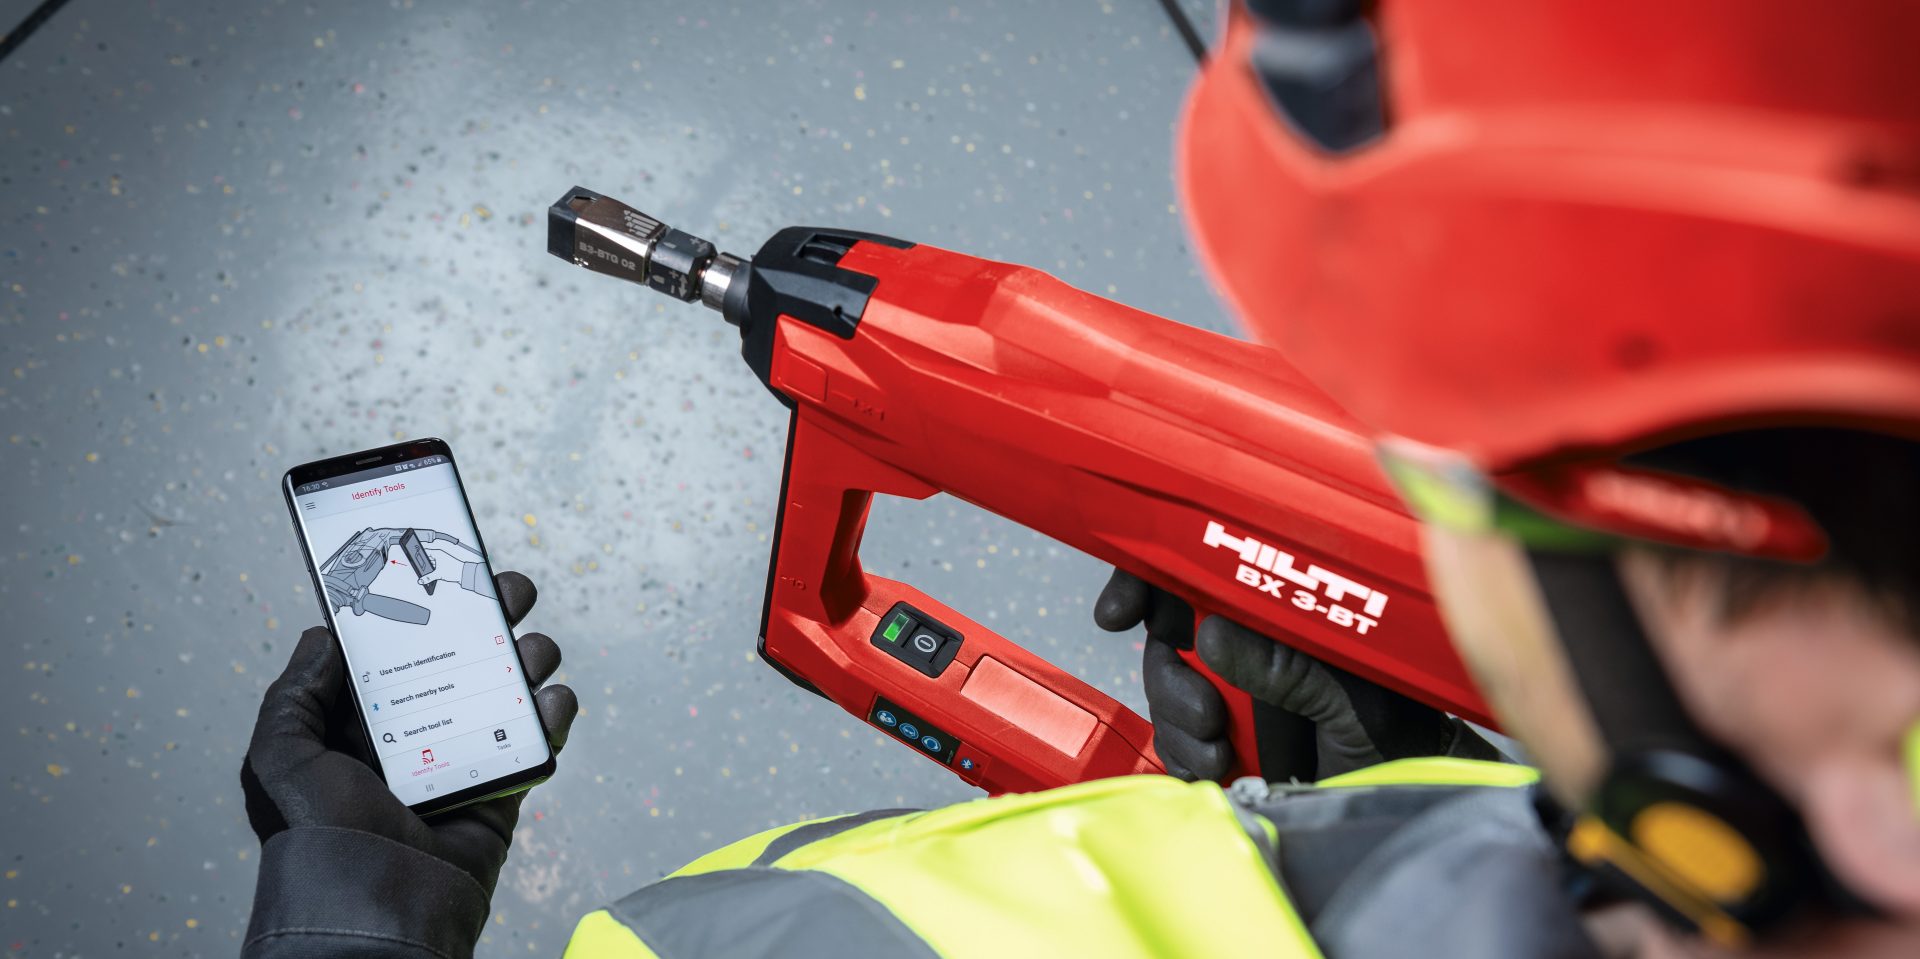 BX 3-BT is a smart tool, connected via the built-in Bluetooth technology and the Hilti Connect App